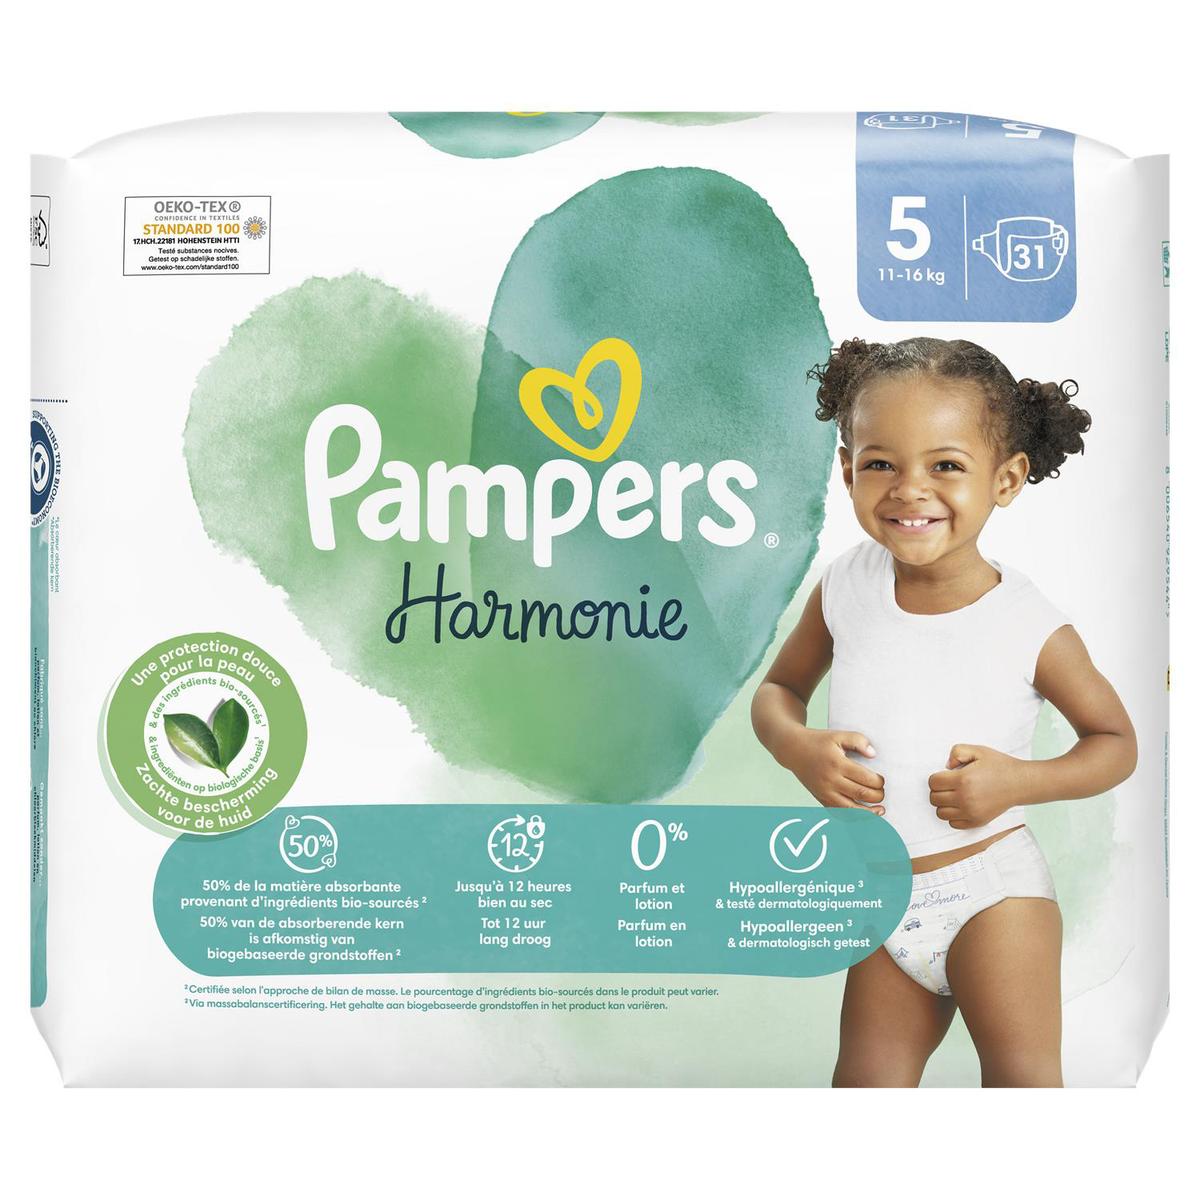 Acheter Promotion Pampers Harmonie Couche T5 11-16 kg, 31 couches